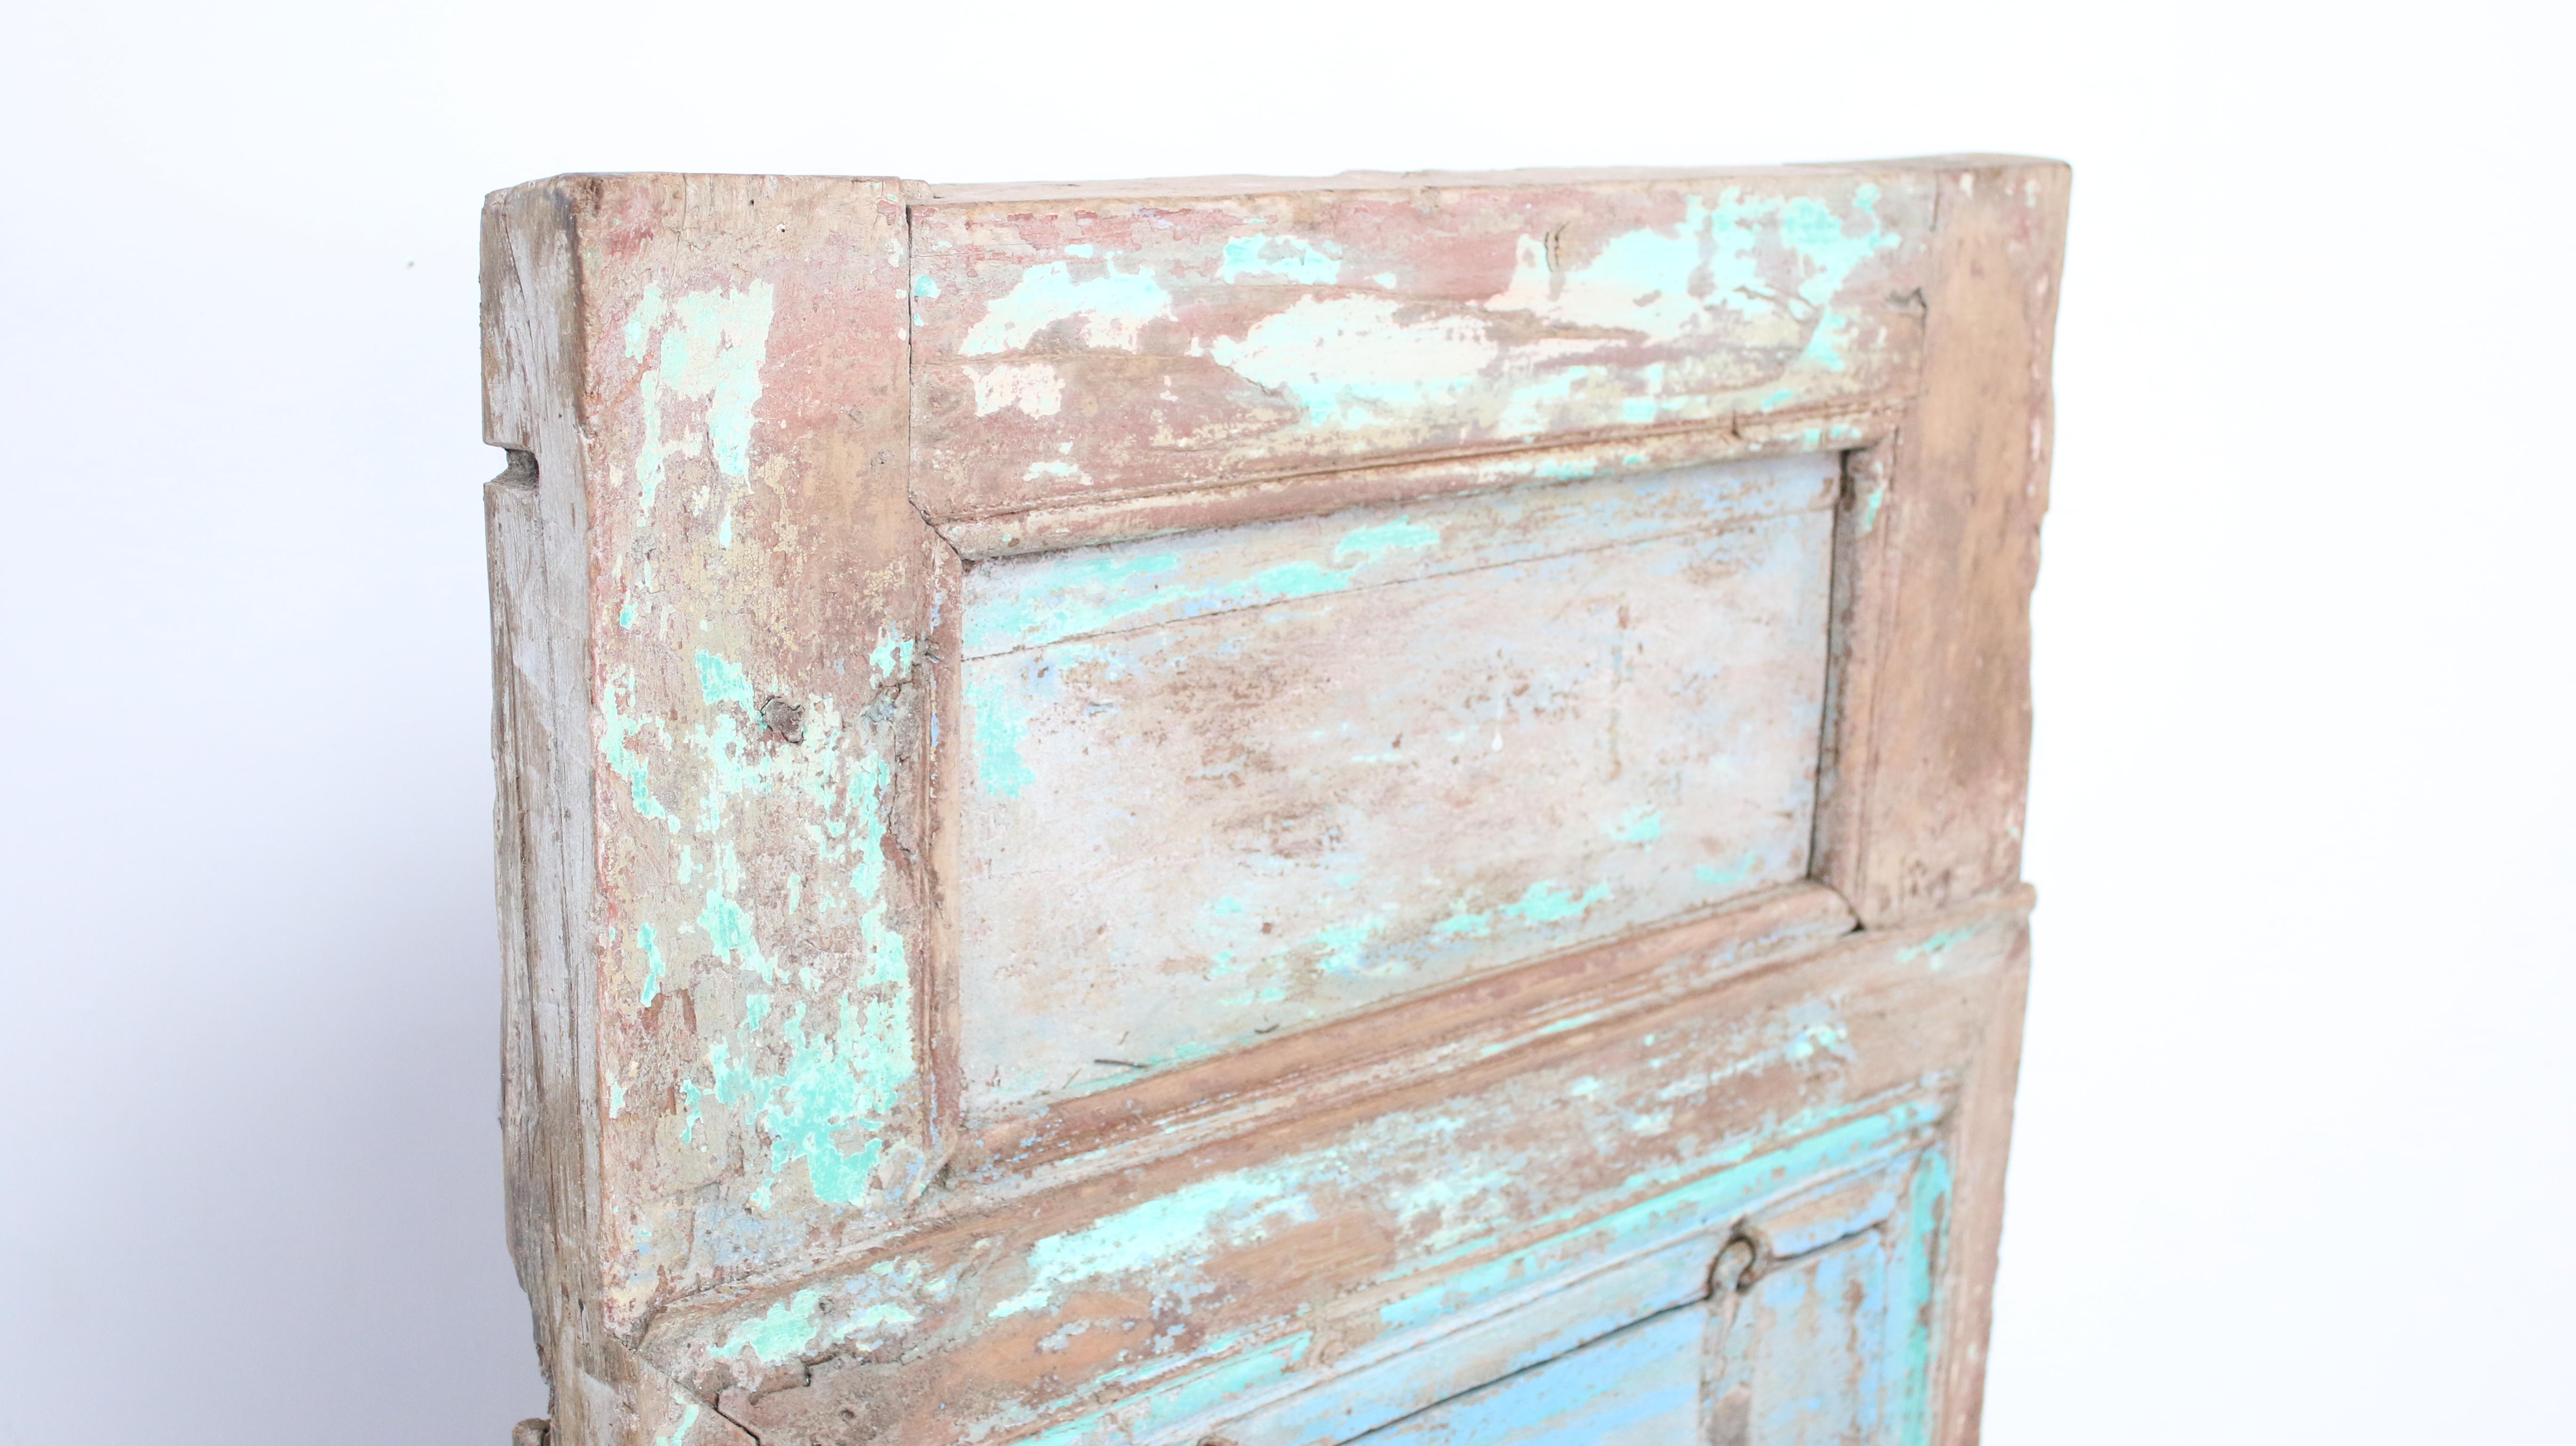 An unusual item, pastel coloured reclaimed internal hatchway or distressed vintage door. It could be used as an old set of rustic painted oak salvaged backdrop interior pieces. Perfect for adding vintage appeal to any room. Lovely distressed and